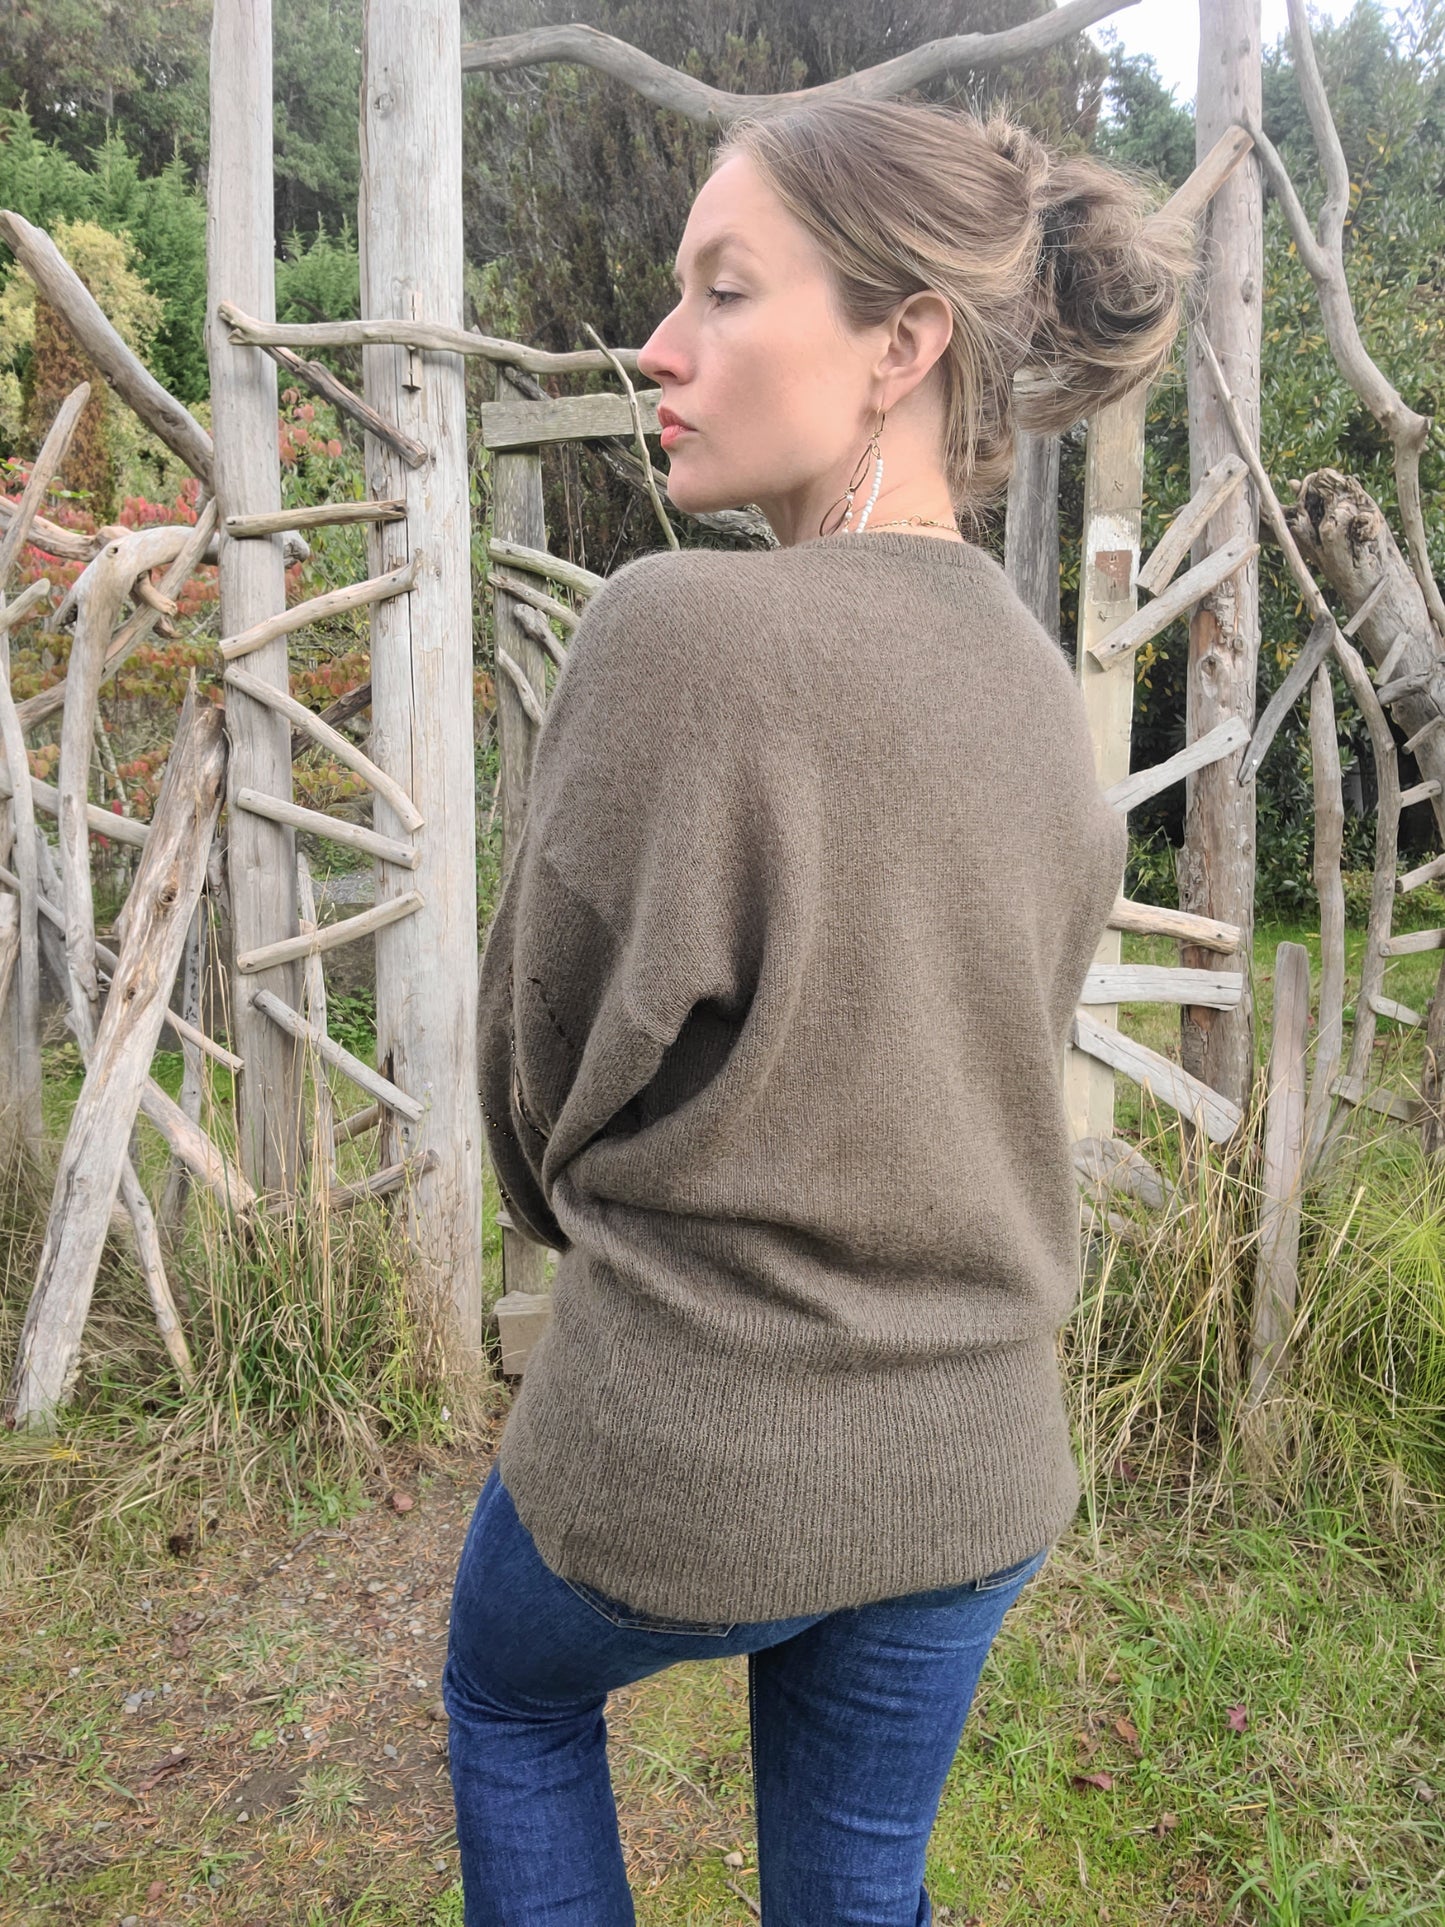 The Mohair + Wool Sweater by Margaretha Ley for ESCADA S